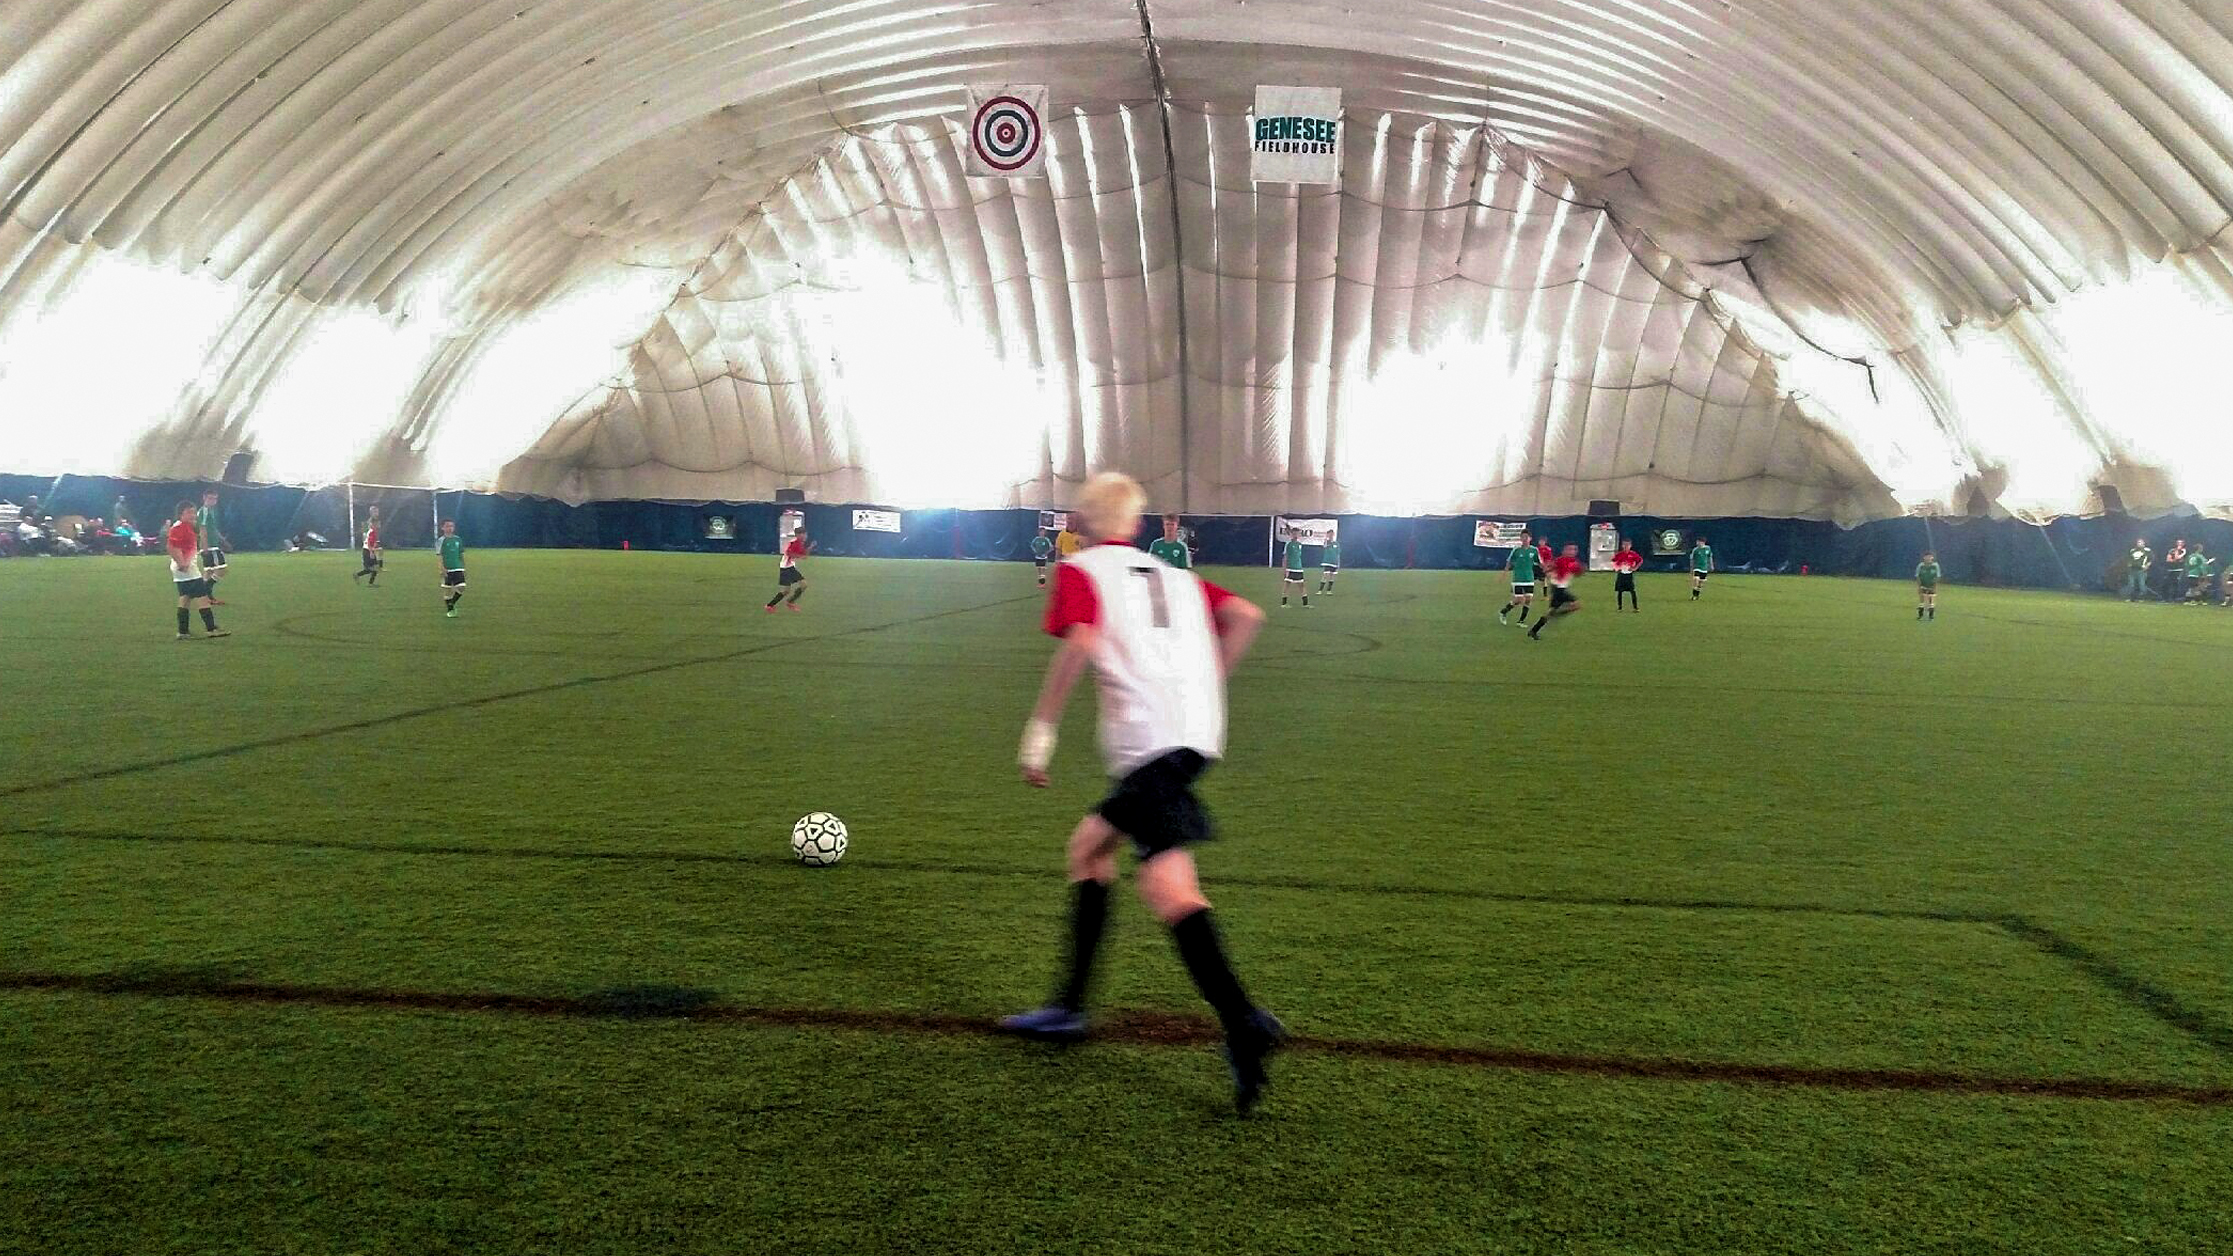 Soccer at the Genesee Fieldhouse in Grand Blanc, MI